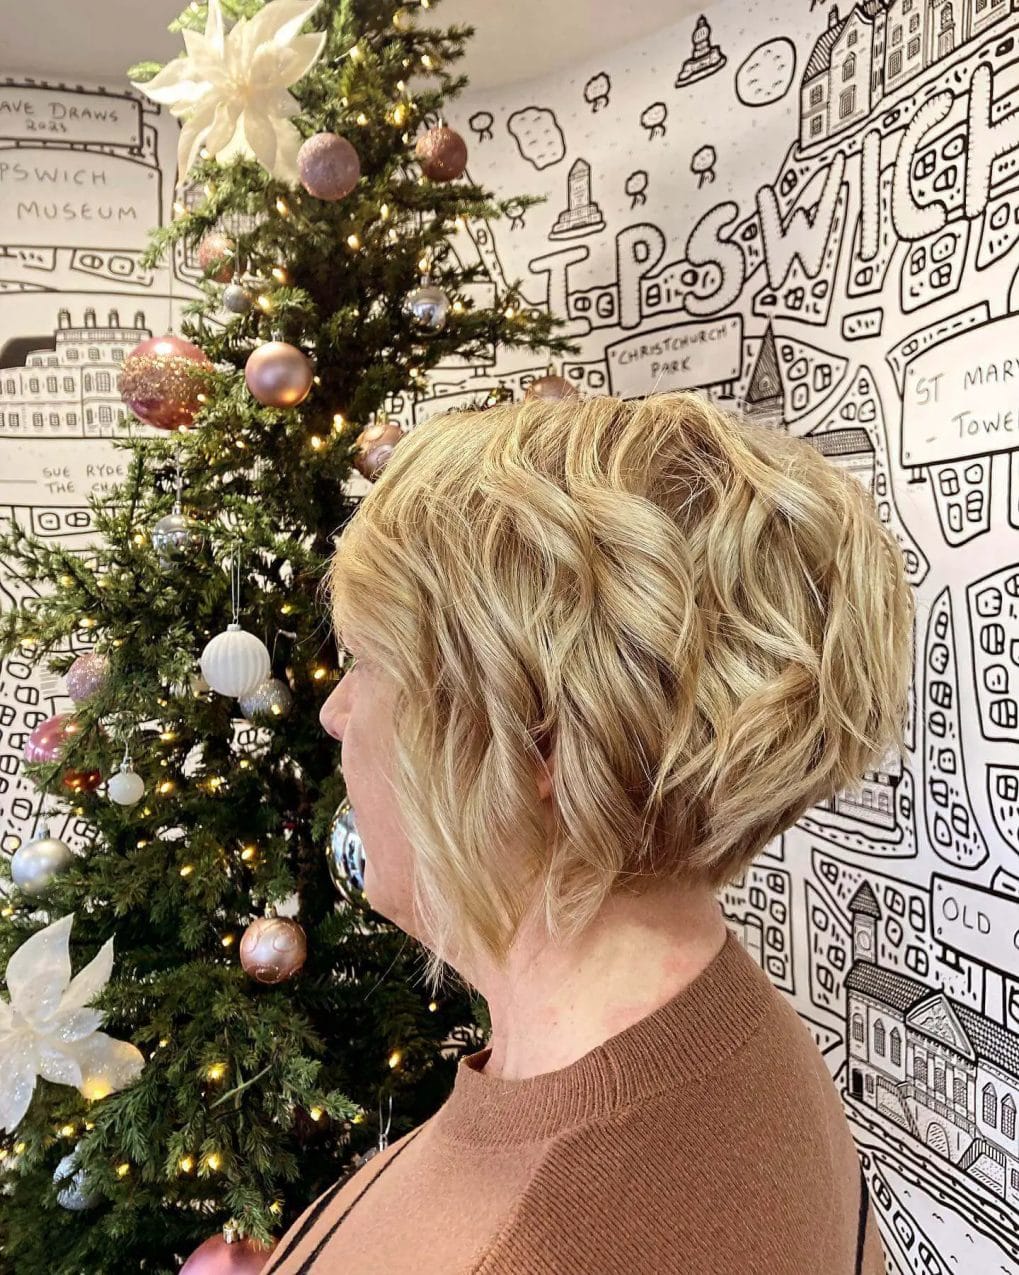 Textured bob with bouncy curls and honey-platinum blend.
